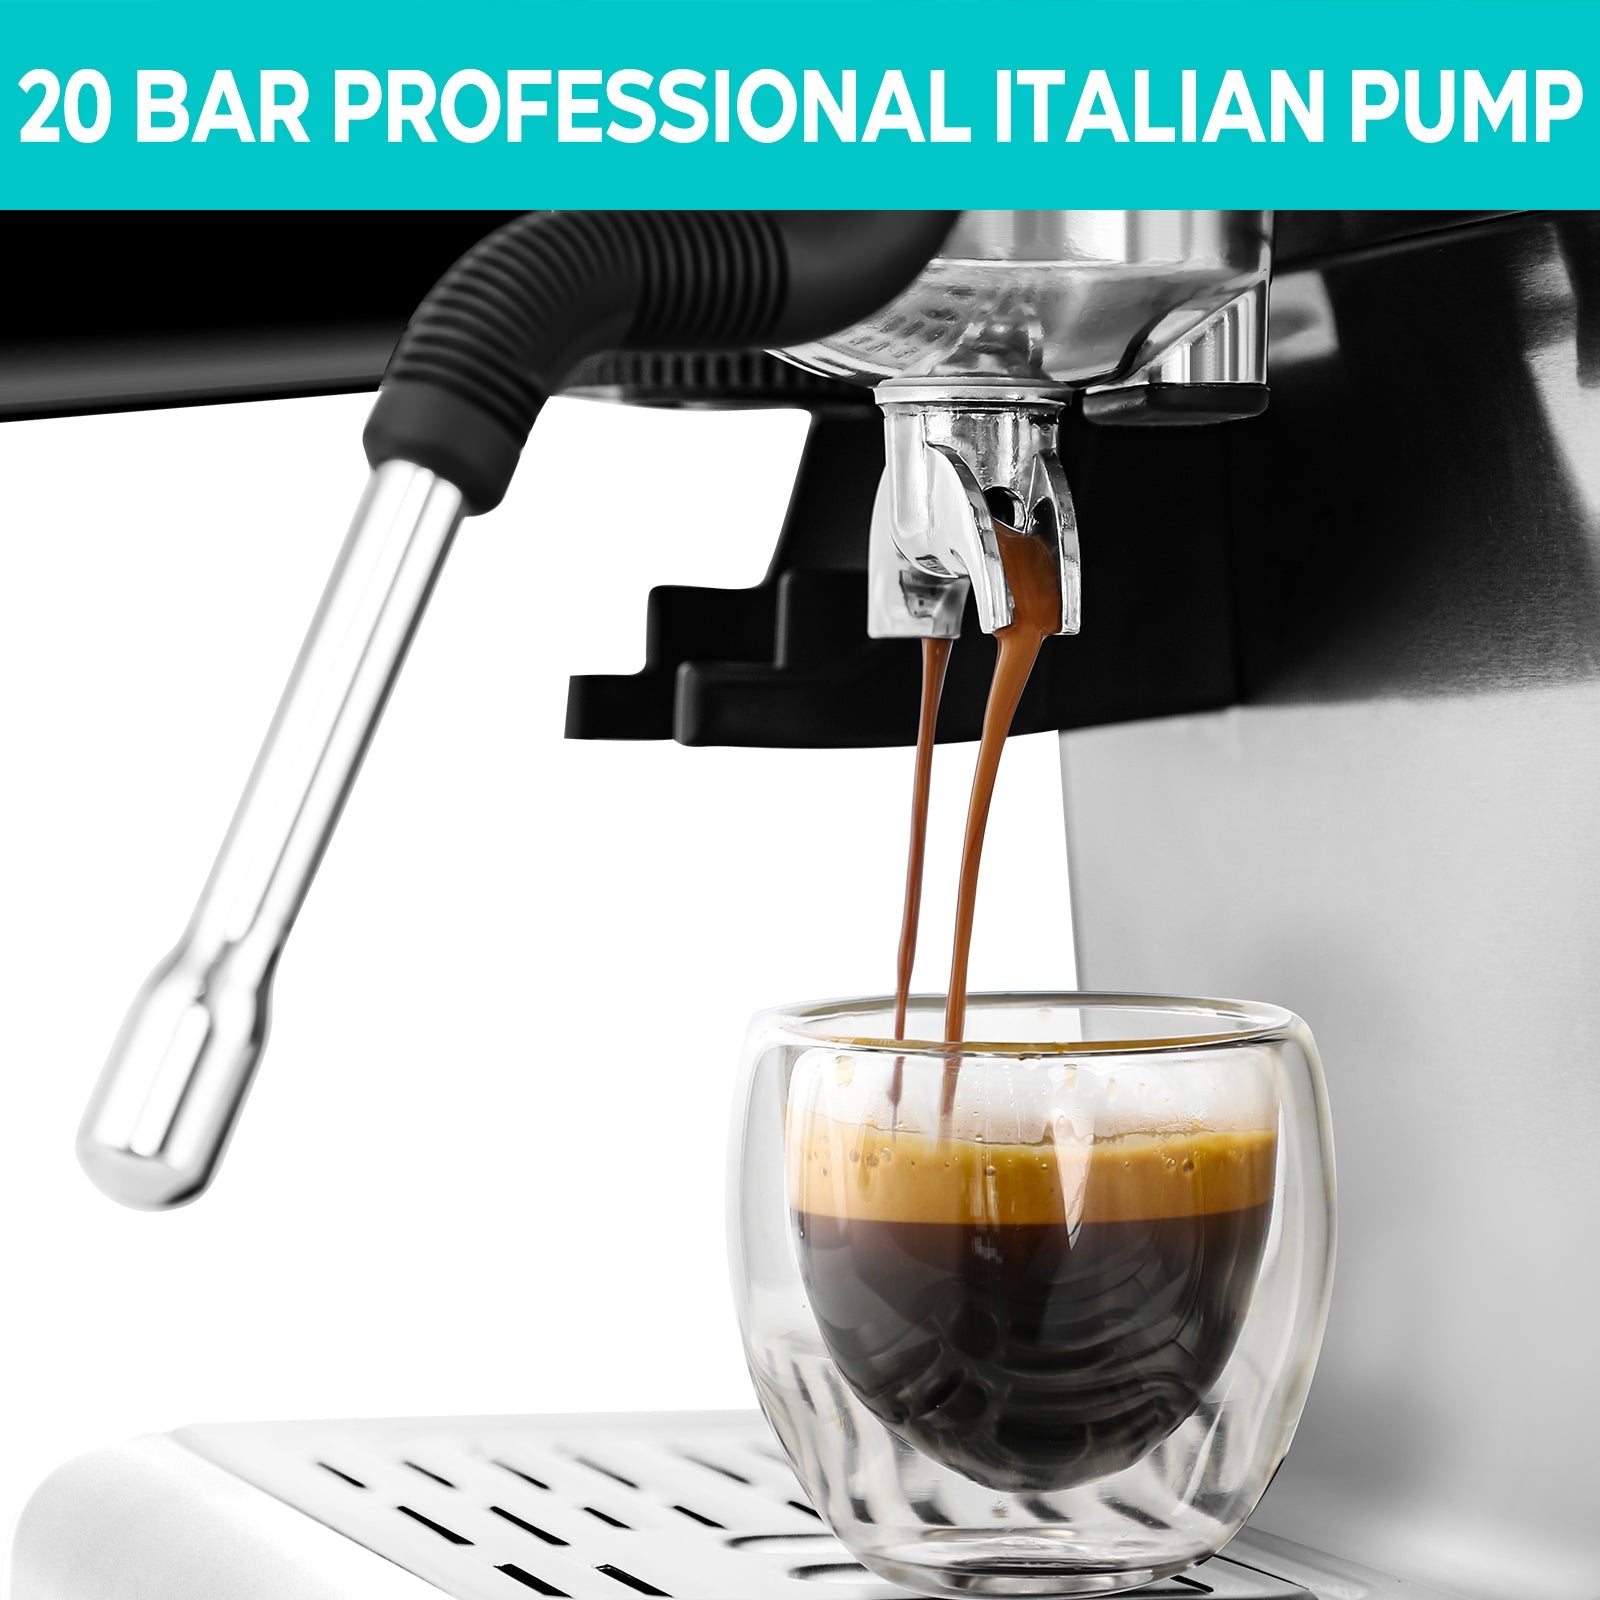 CASABREWS CM5418 Compact 20-Bar Espresso Machine with Stainless Steel Milk Frother Black